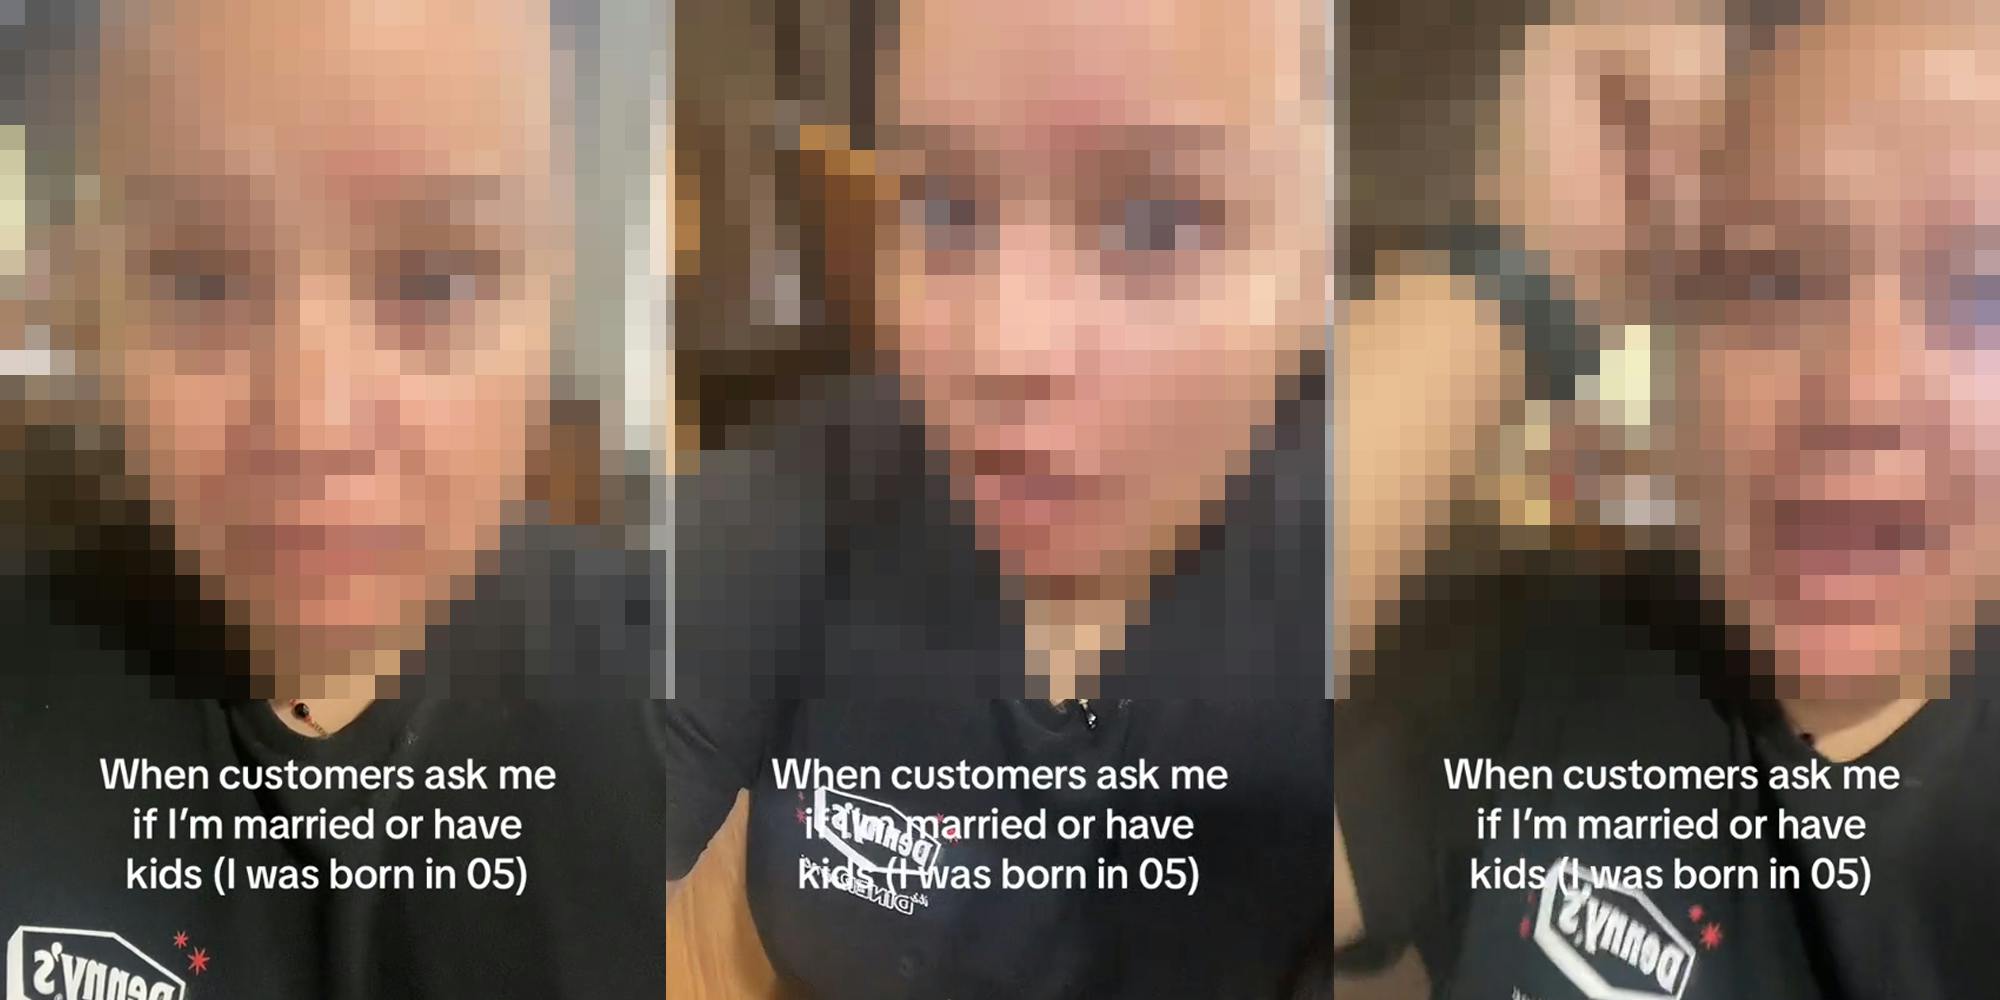 server blurred with caption "When customers ask me if I'm married or have kids (I was born in 05)" (l) server blurred with caption "When customers ask me if I'm married or have kids (I was born in 05)" (c) server blurred with caption "When customers ask me if I'm married or have kids (I was born in 05)" (r)